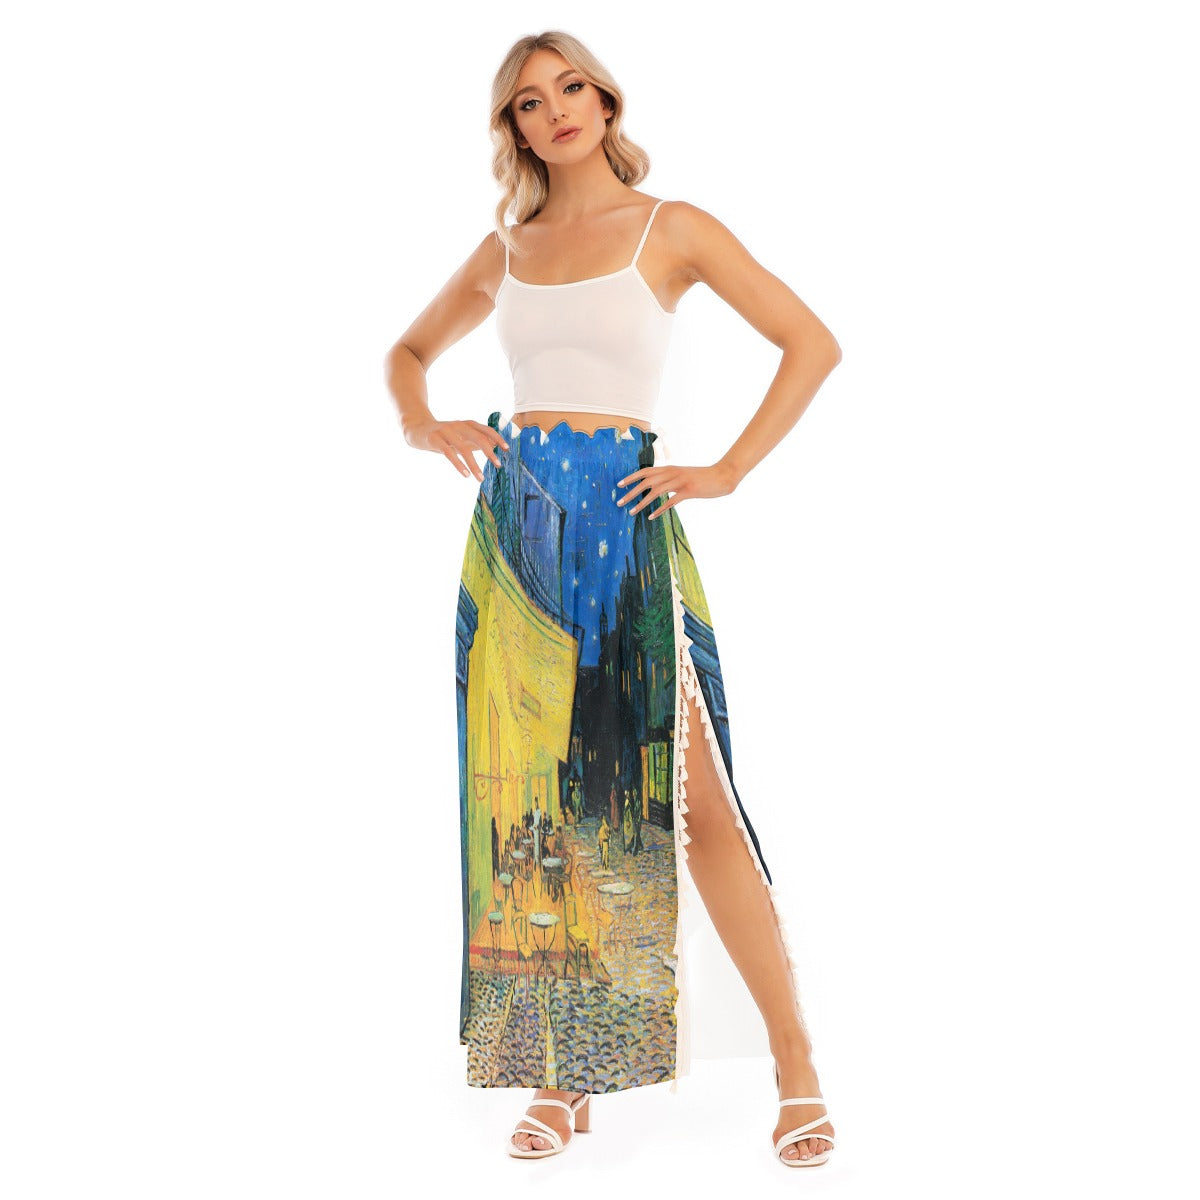 Unique skirt design with artistic flair.